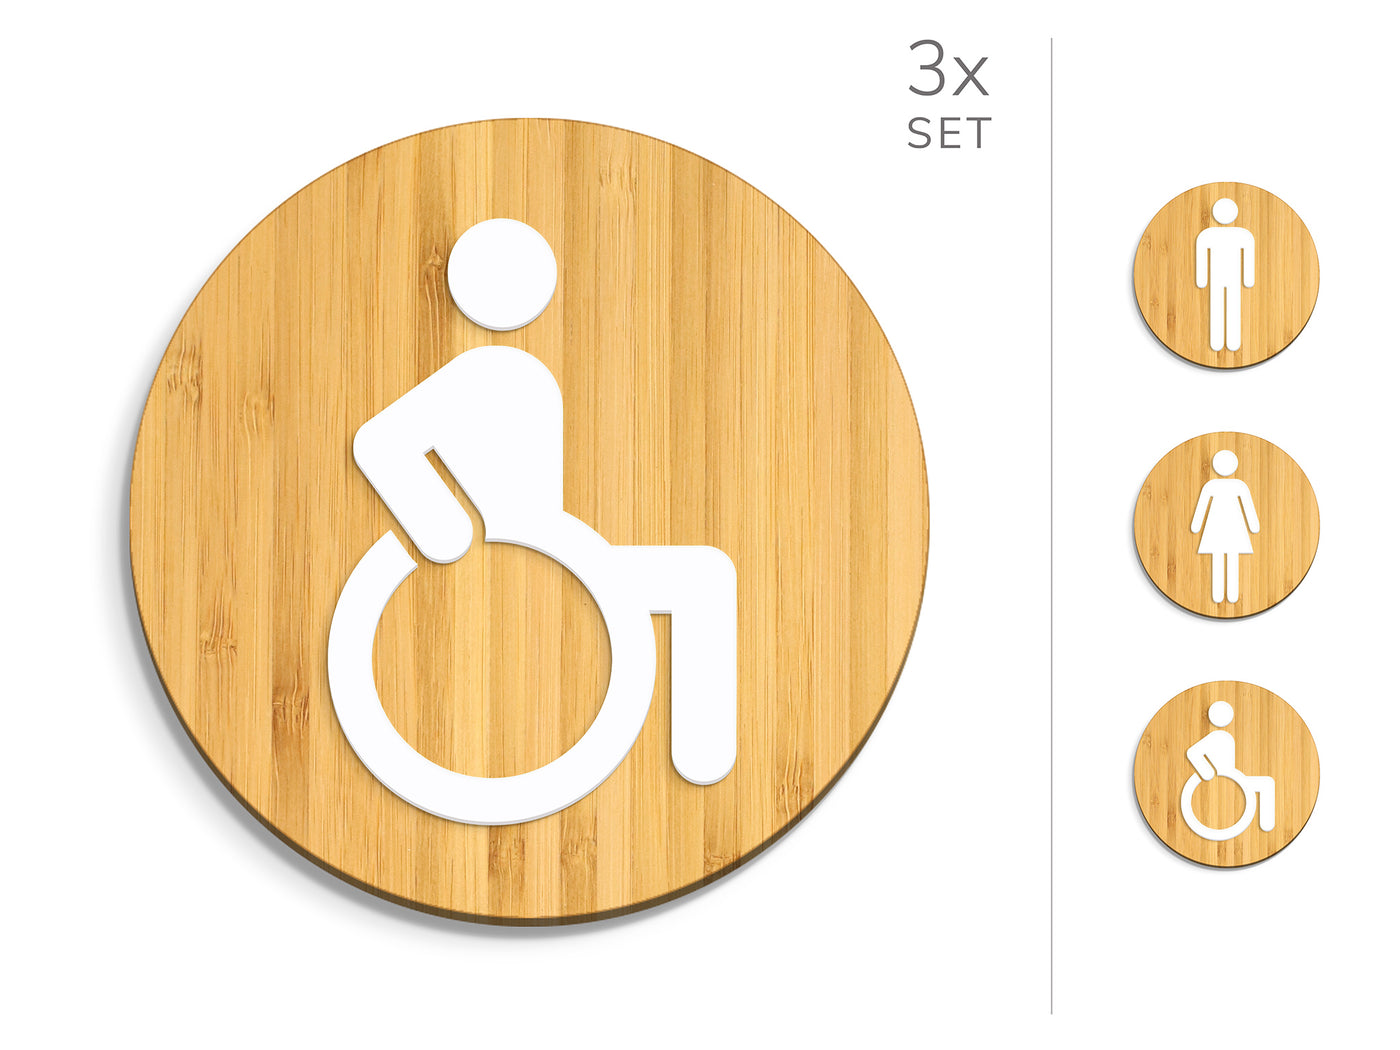 Classic, 3x Round Base - Restroom Signs Set - Man, Woman, Disabled